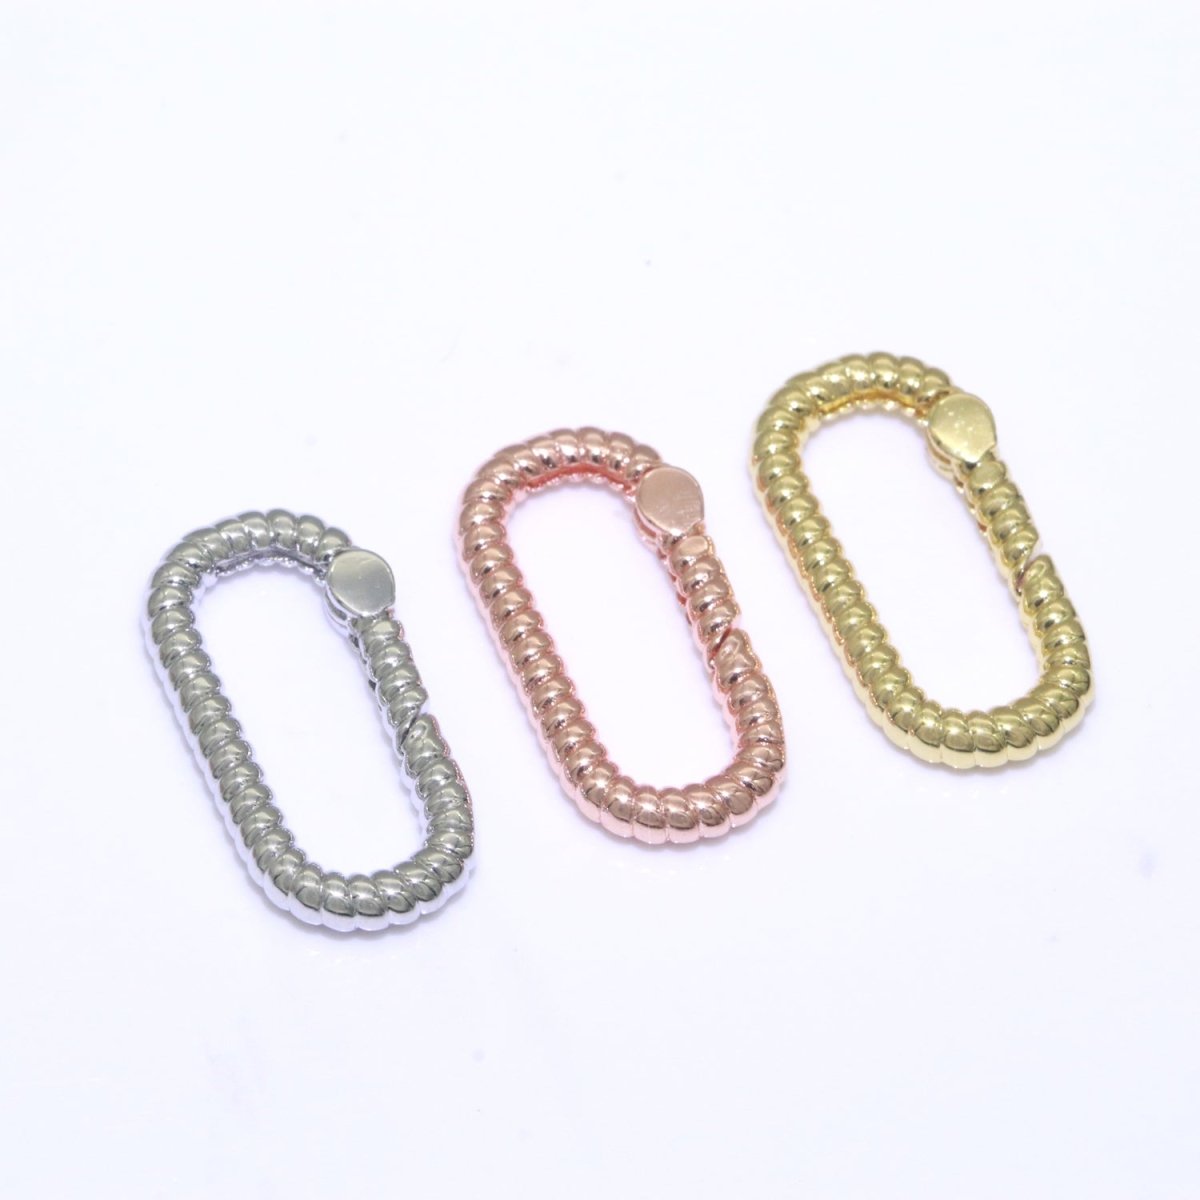 Twisted Gold Spring Gate Ring, 18.8 mm Marine Rope Push Gate ring, Charm Holder Clasp for Connector Bracelet End Clasp Rose Gold Silver L-451~L-453 - DLUXCA